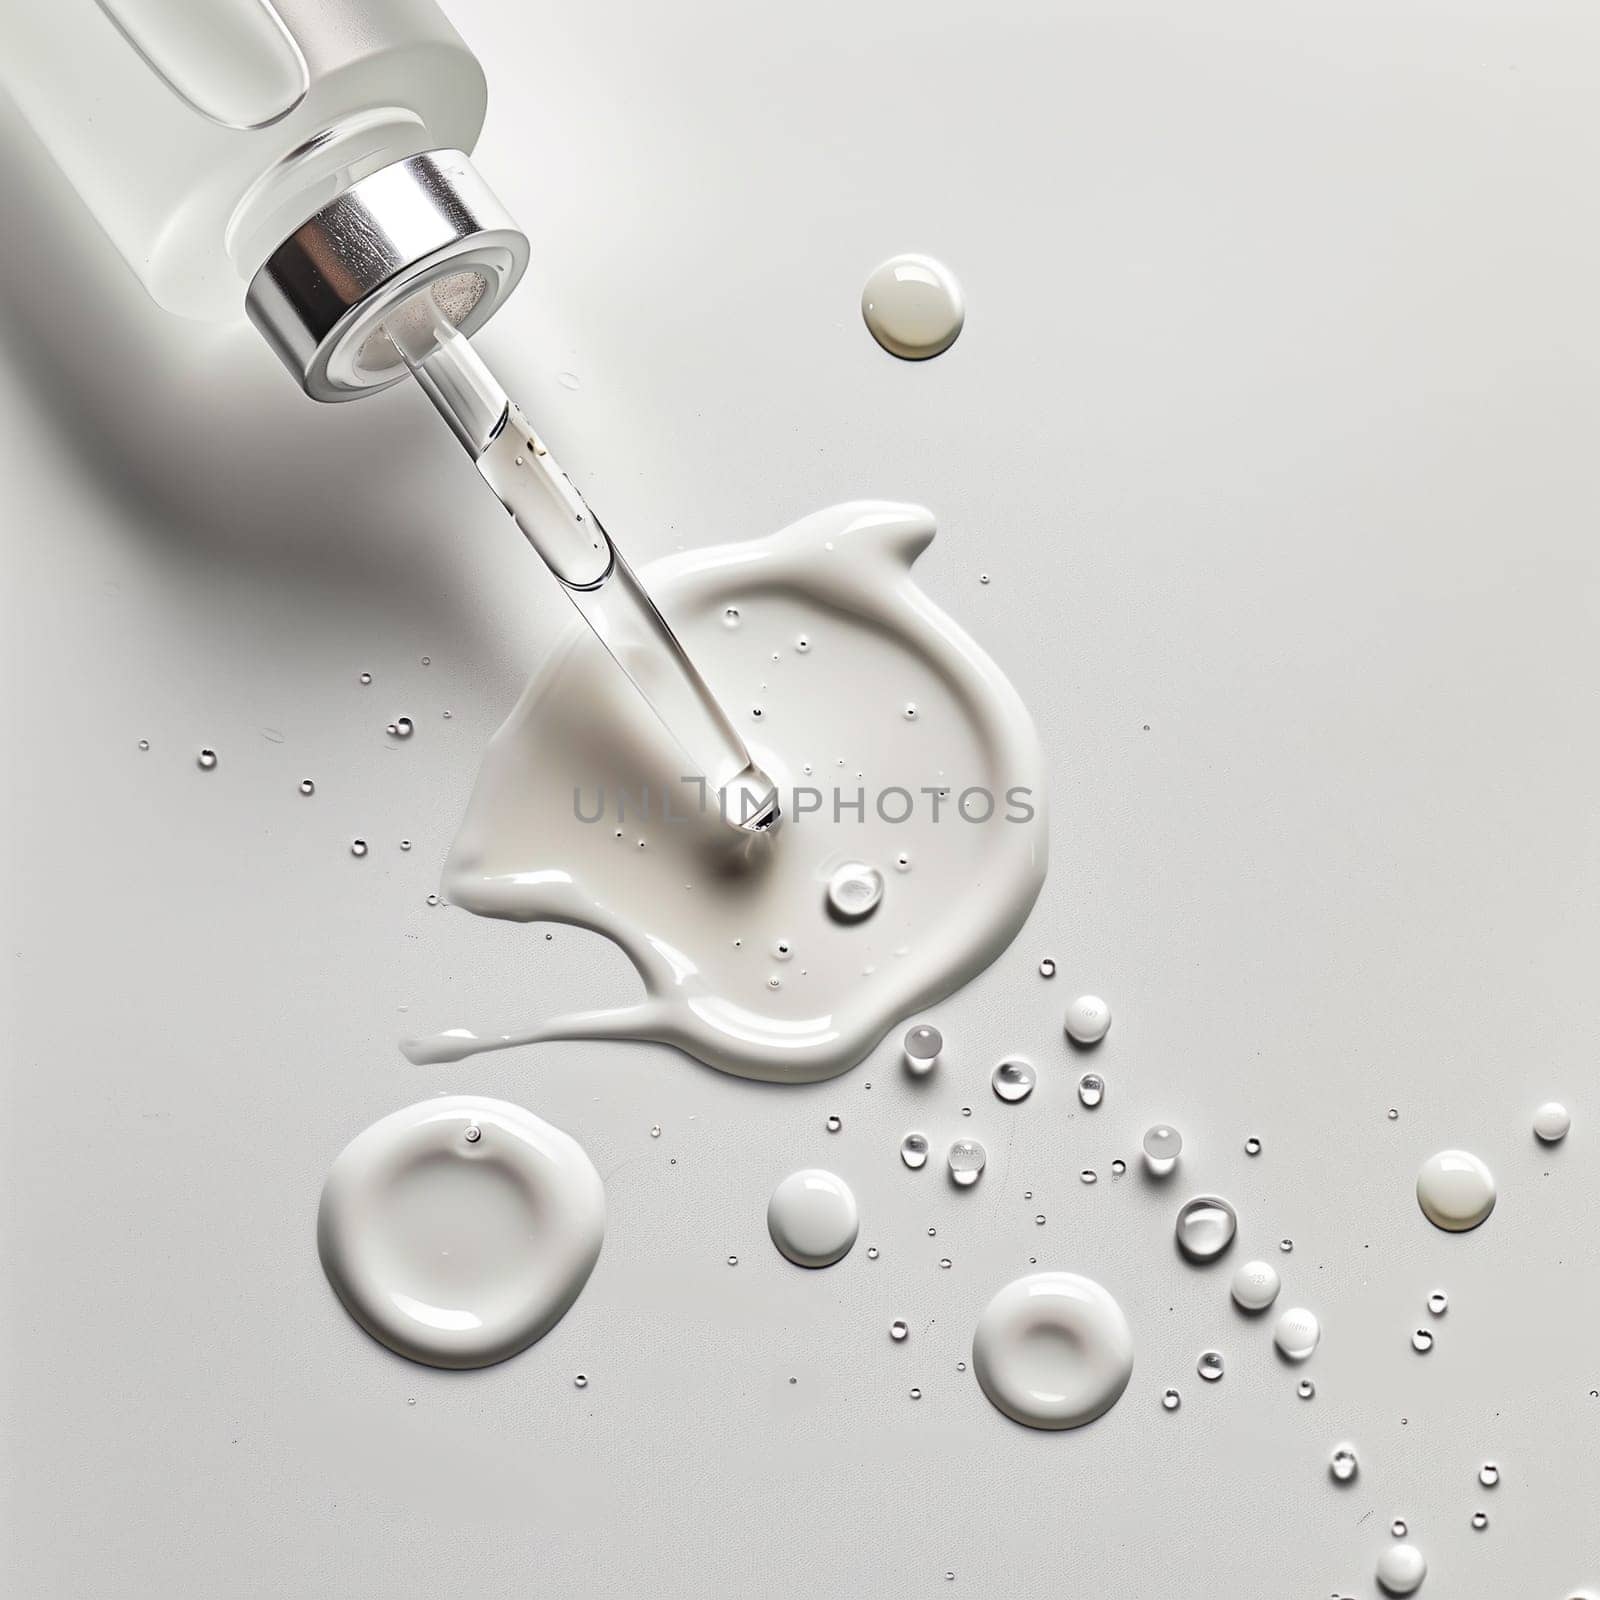 Drops of cosmetic serum and a pipette. A skin care product. White background. Copy space.